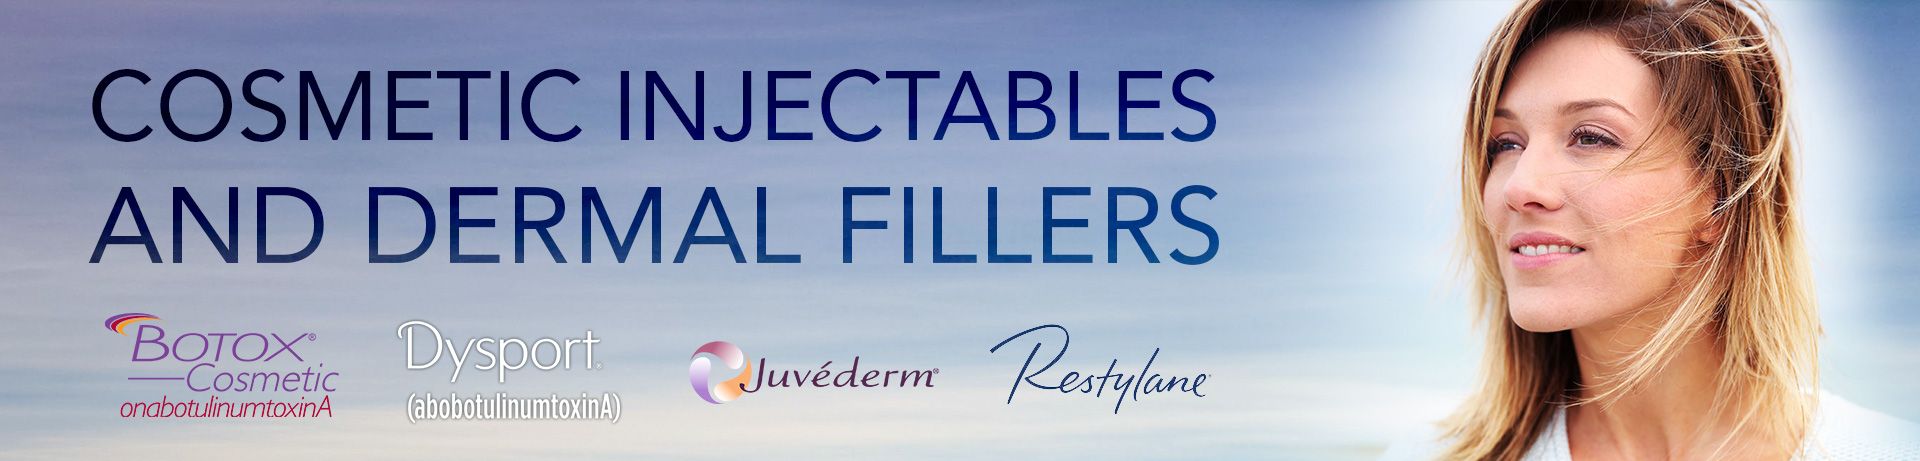 Injectables and Fillers anti aging treatments in Naples FL